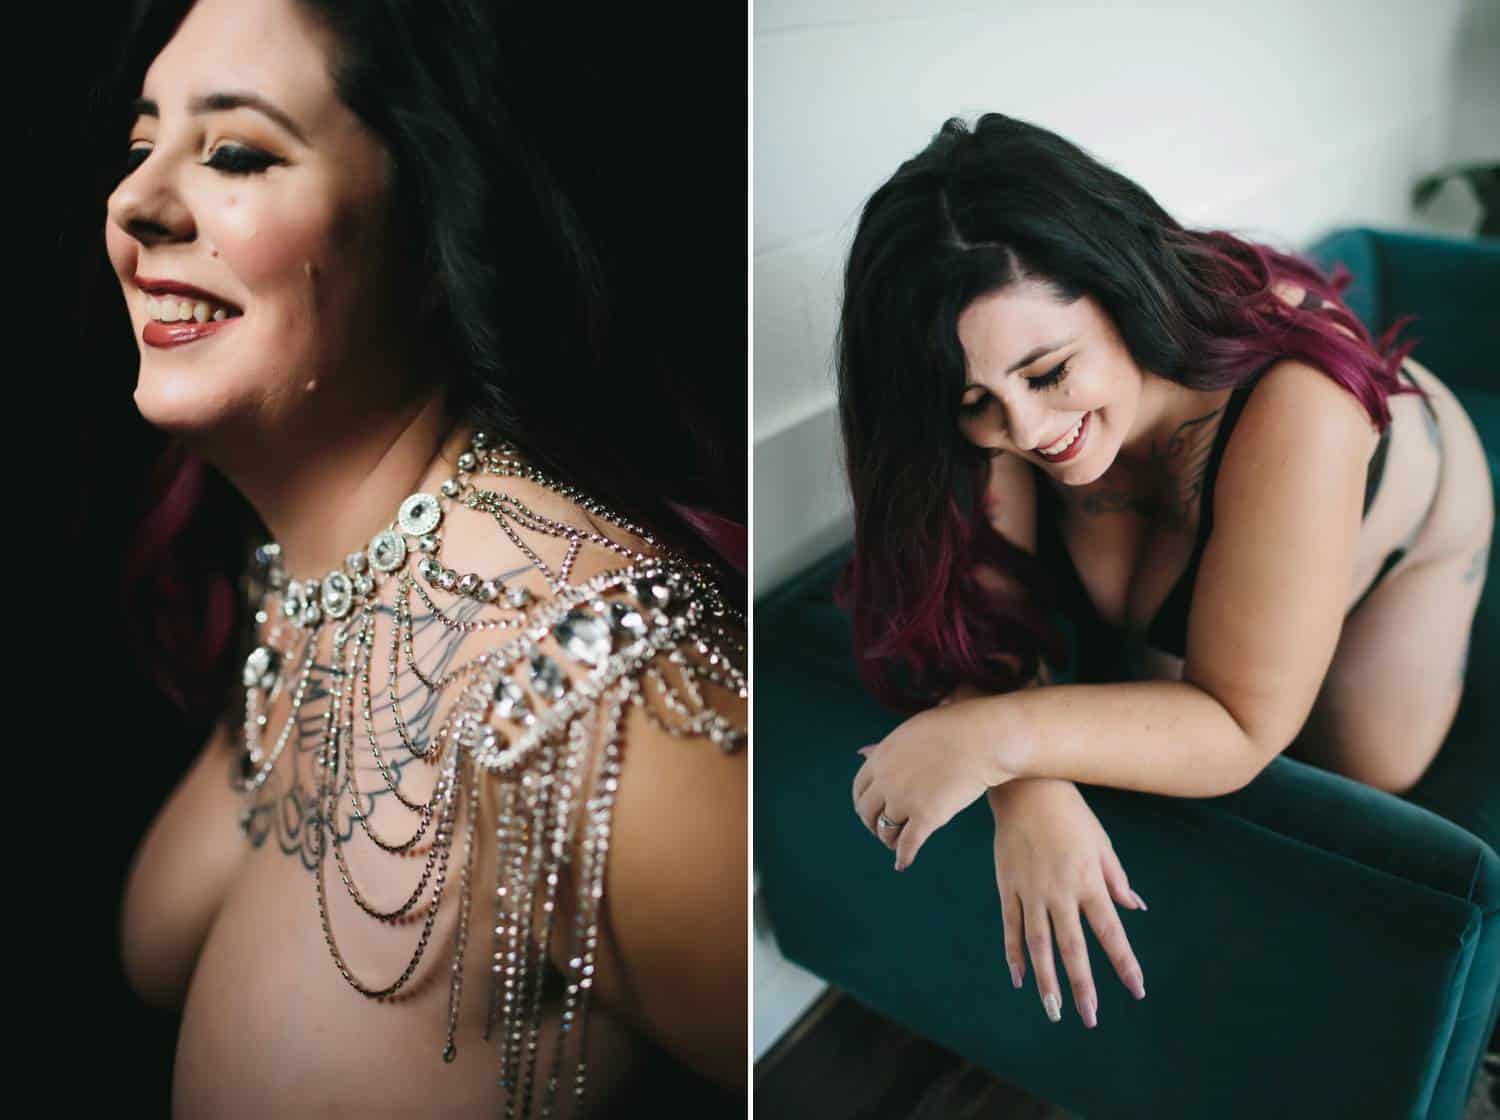 Two photos depict a brunette woman smiling for her boudoir shoot. In the first photo, her shoulders are draped with a layered necklace as the rest of her appears to be nude. In the next photo, she knees over the arm of a green velvet sofa wearing a burgundy negligee.